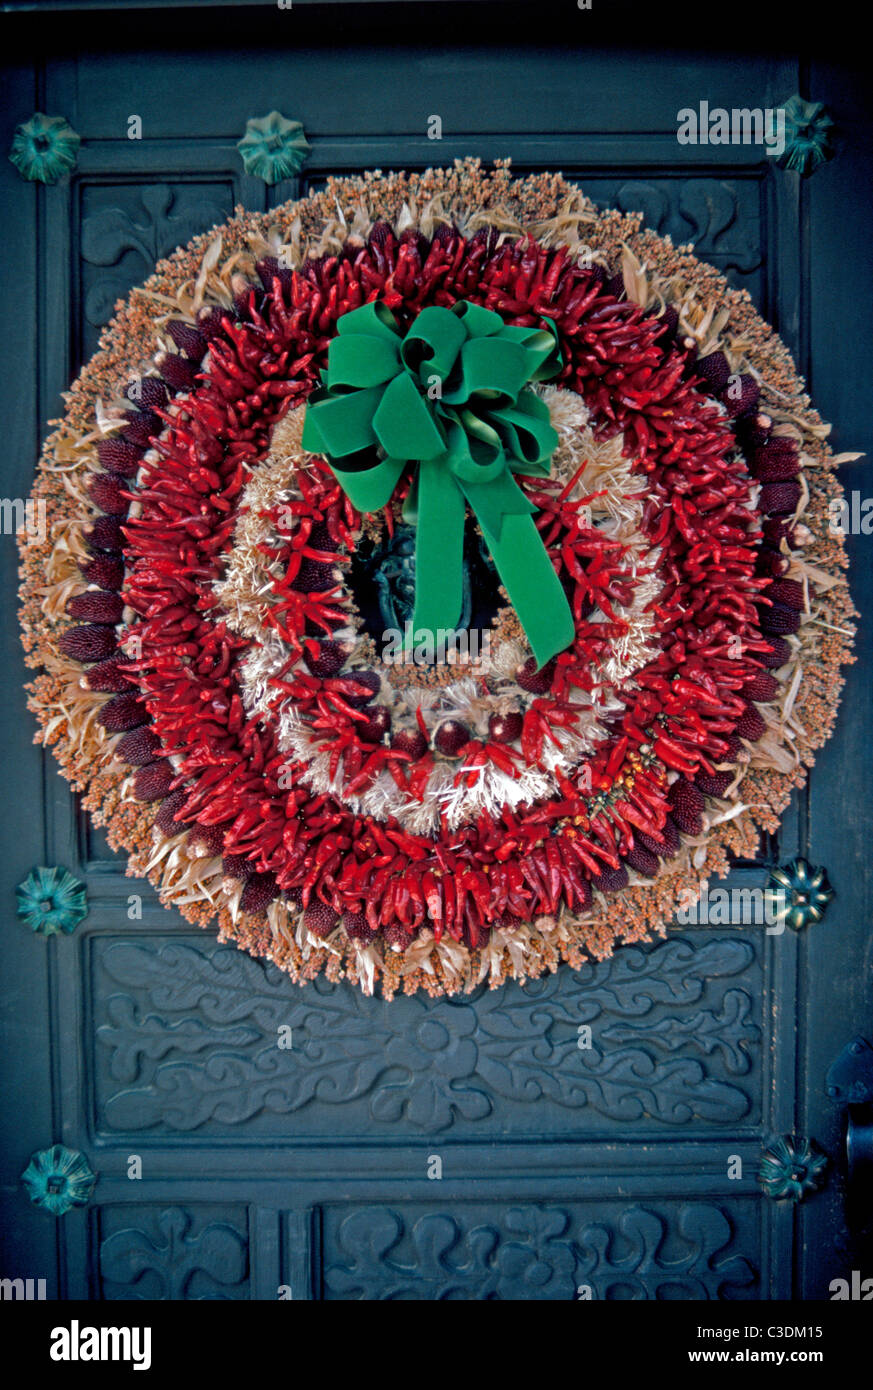 A traditional Southwestern Christmas holiday wreath hanging on an old carved wooden door features dried red chili peppers in Santa Fe, New Mexico, USA. Stock Photo